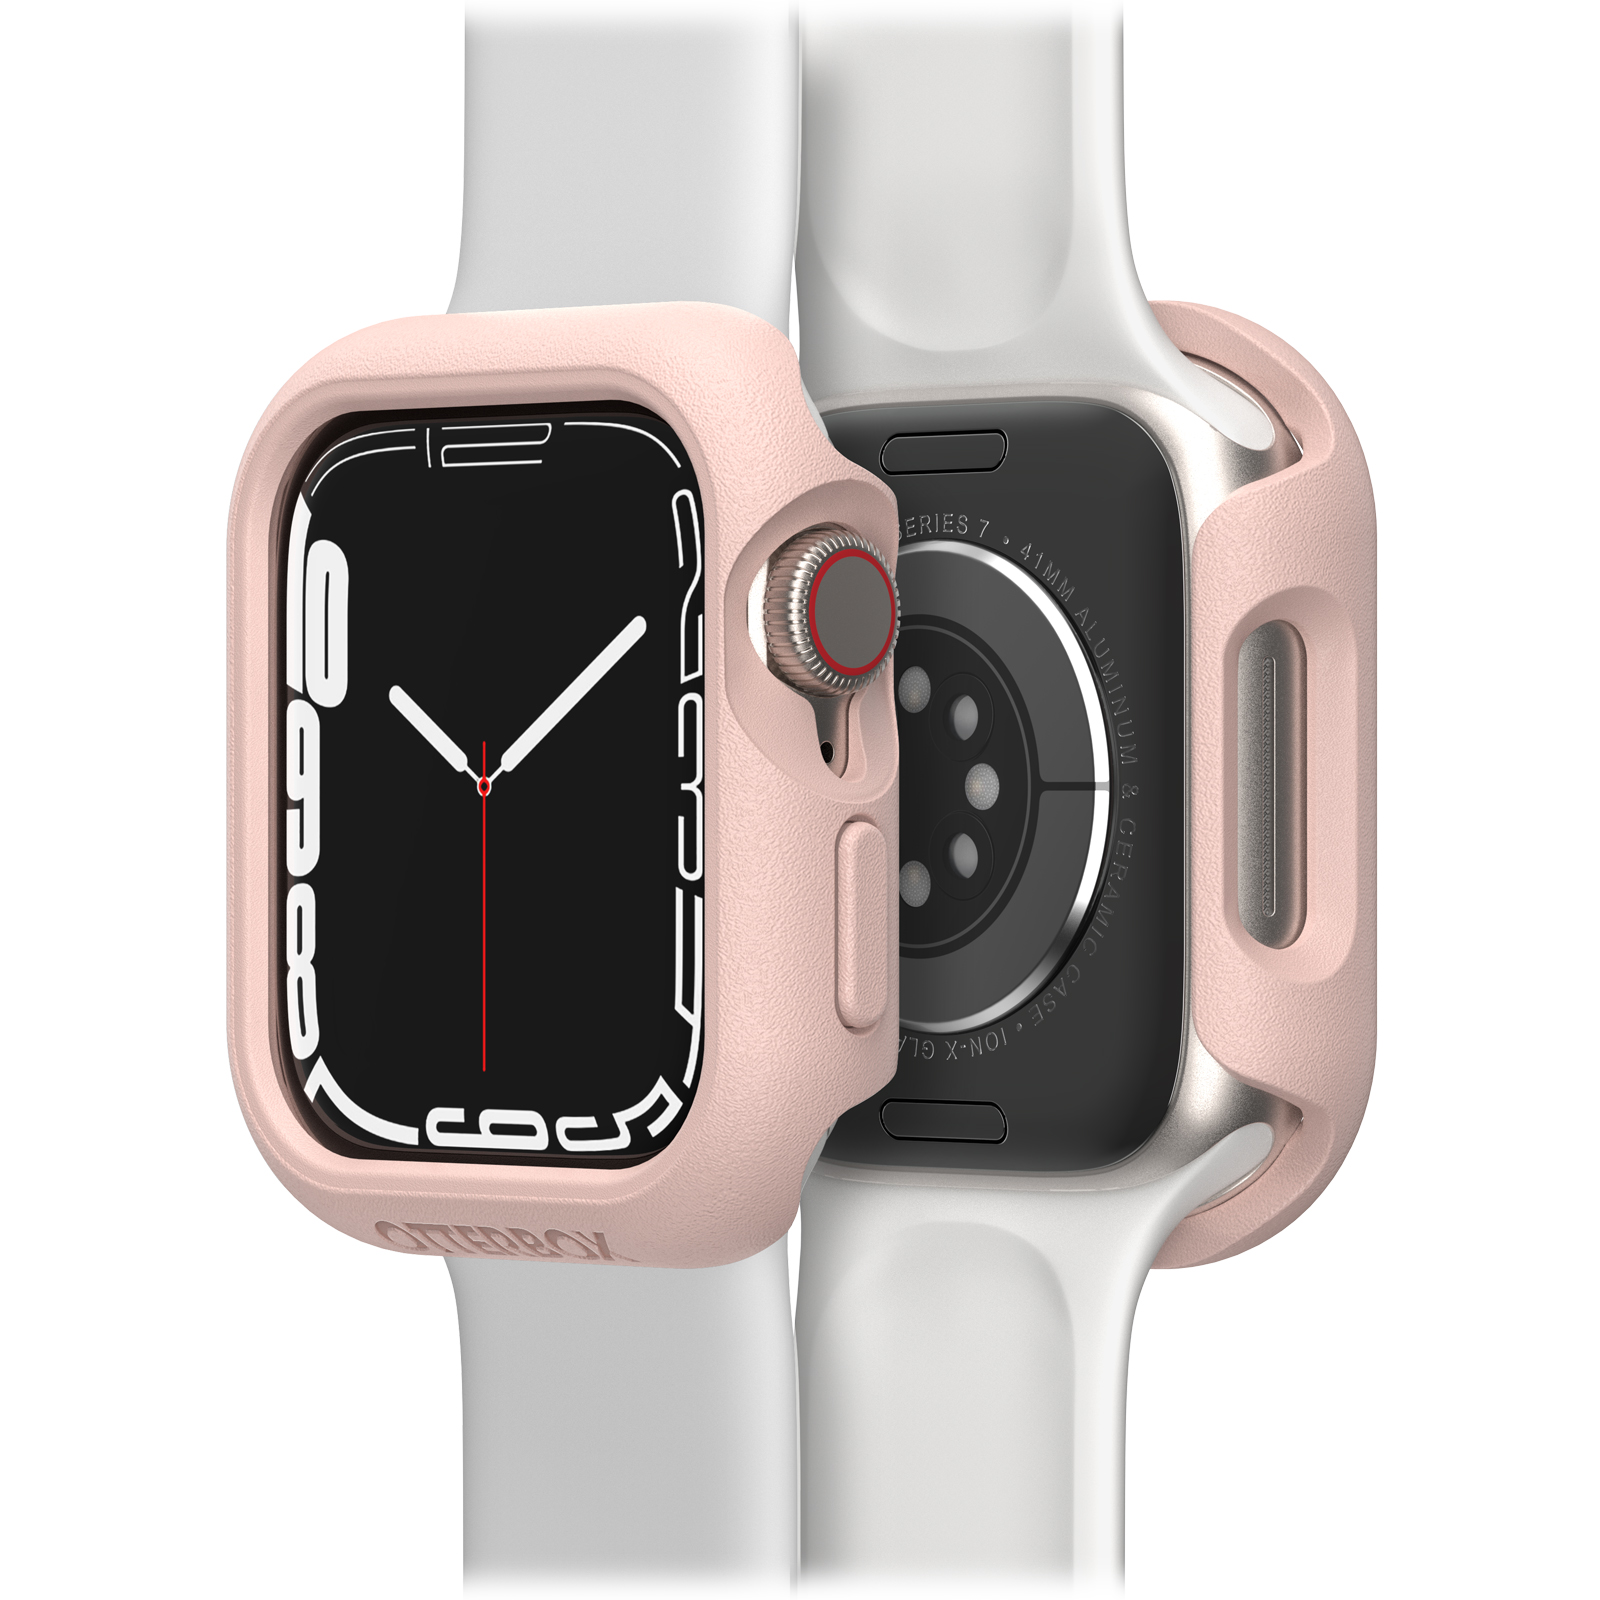 Pink Apple Watch Protective Case | OtterBox Cases for Apple